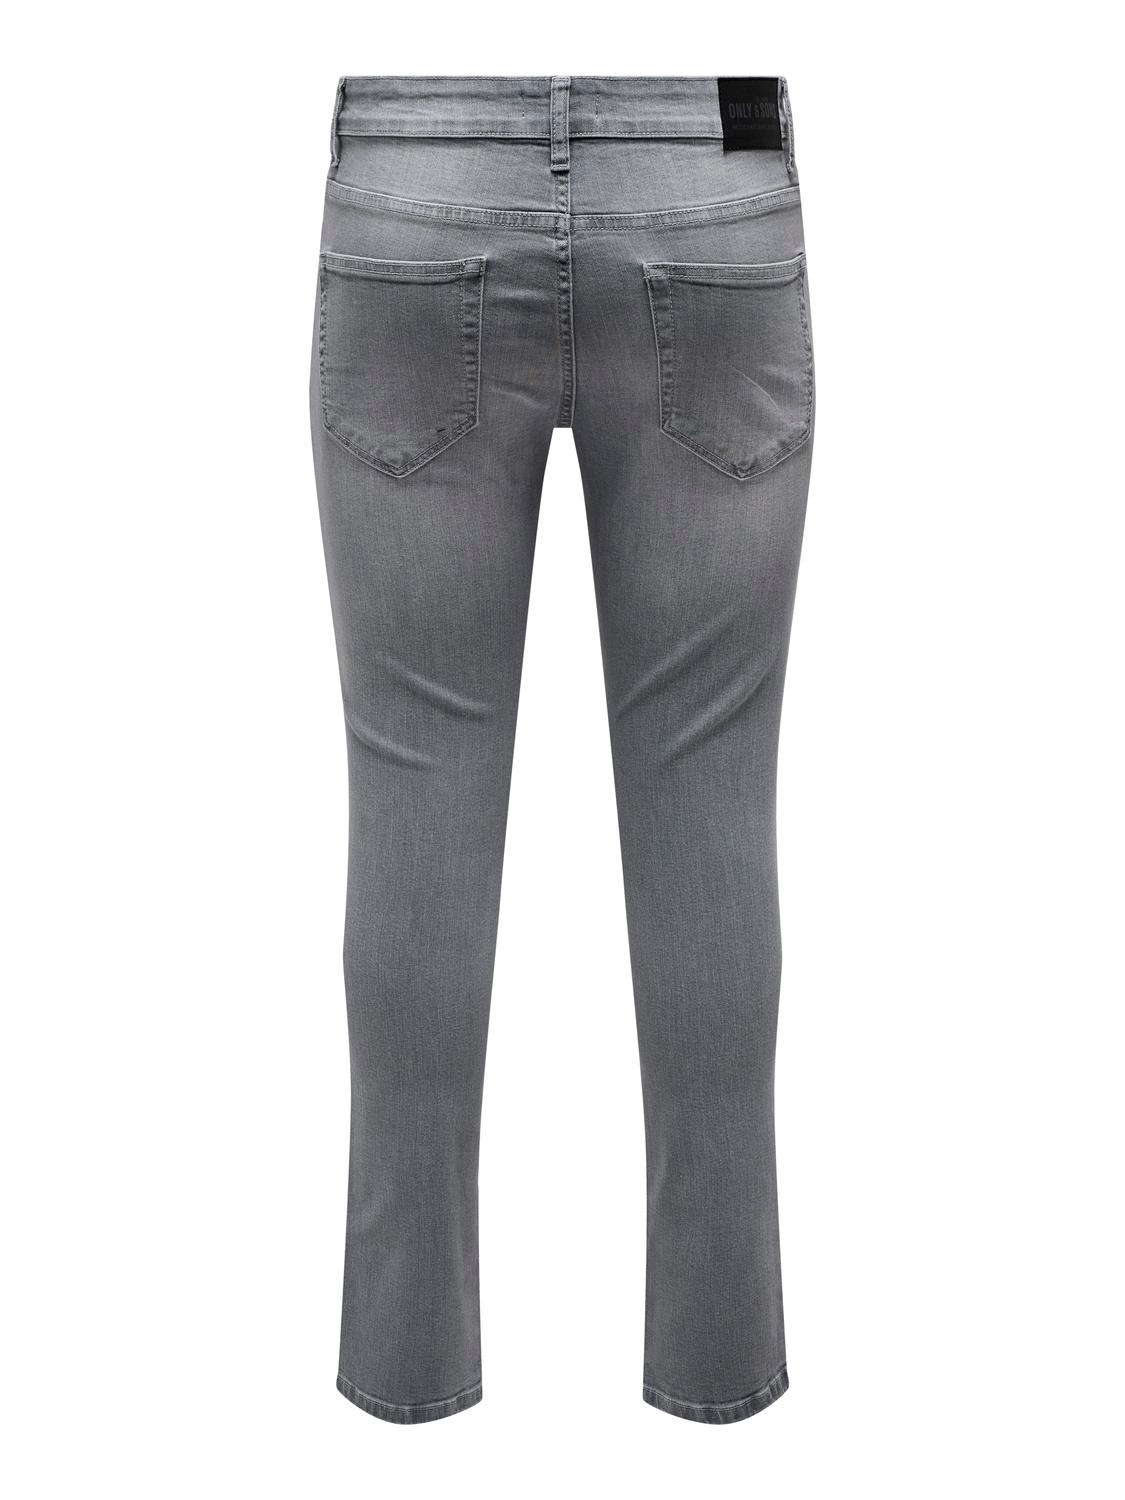 ONLY & SONS Slim Fit Low rise Jeans -Light Grey Denim - 22028265